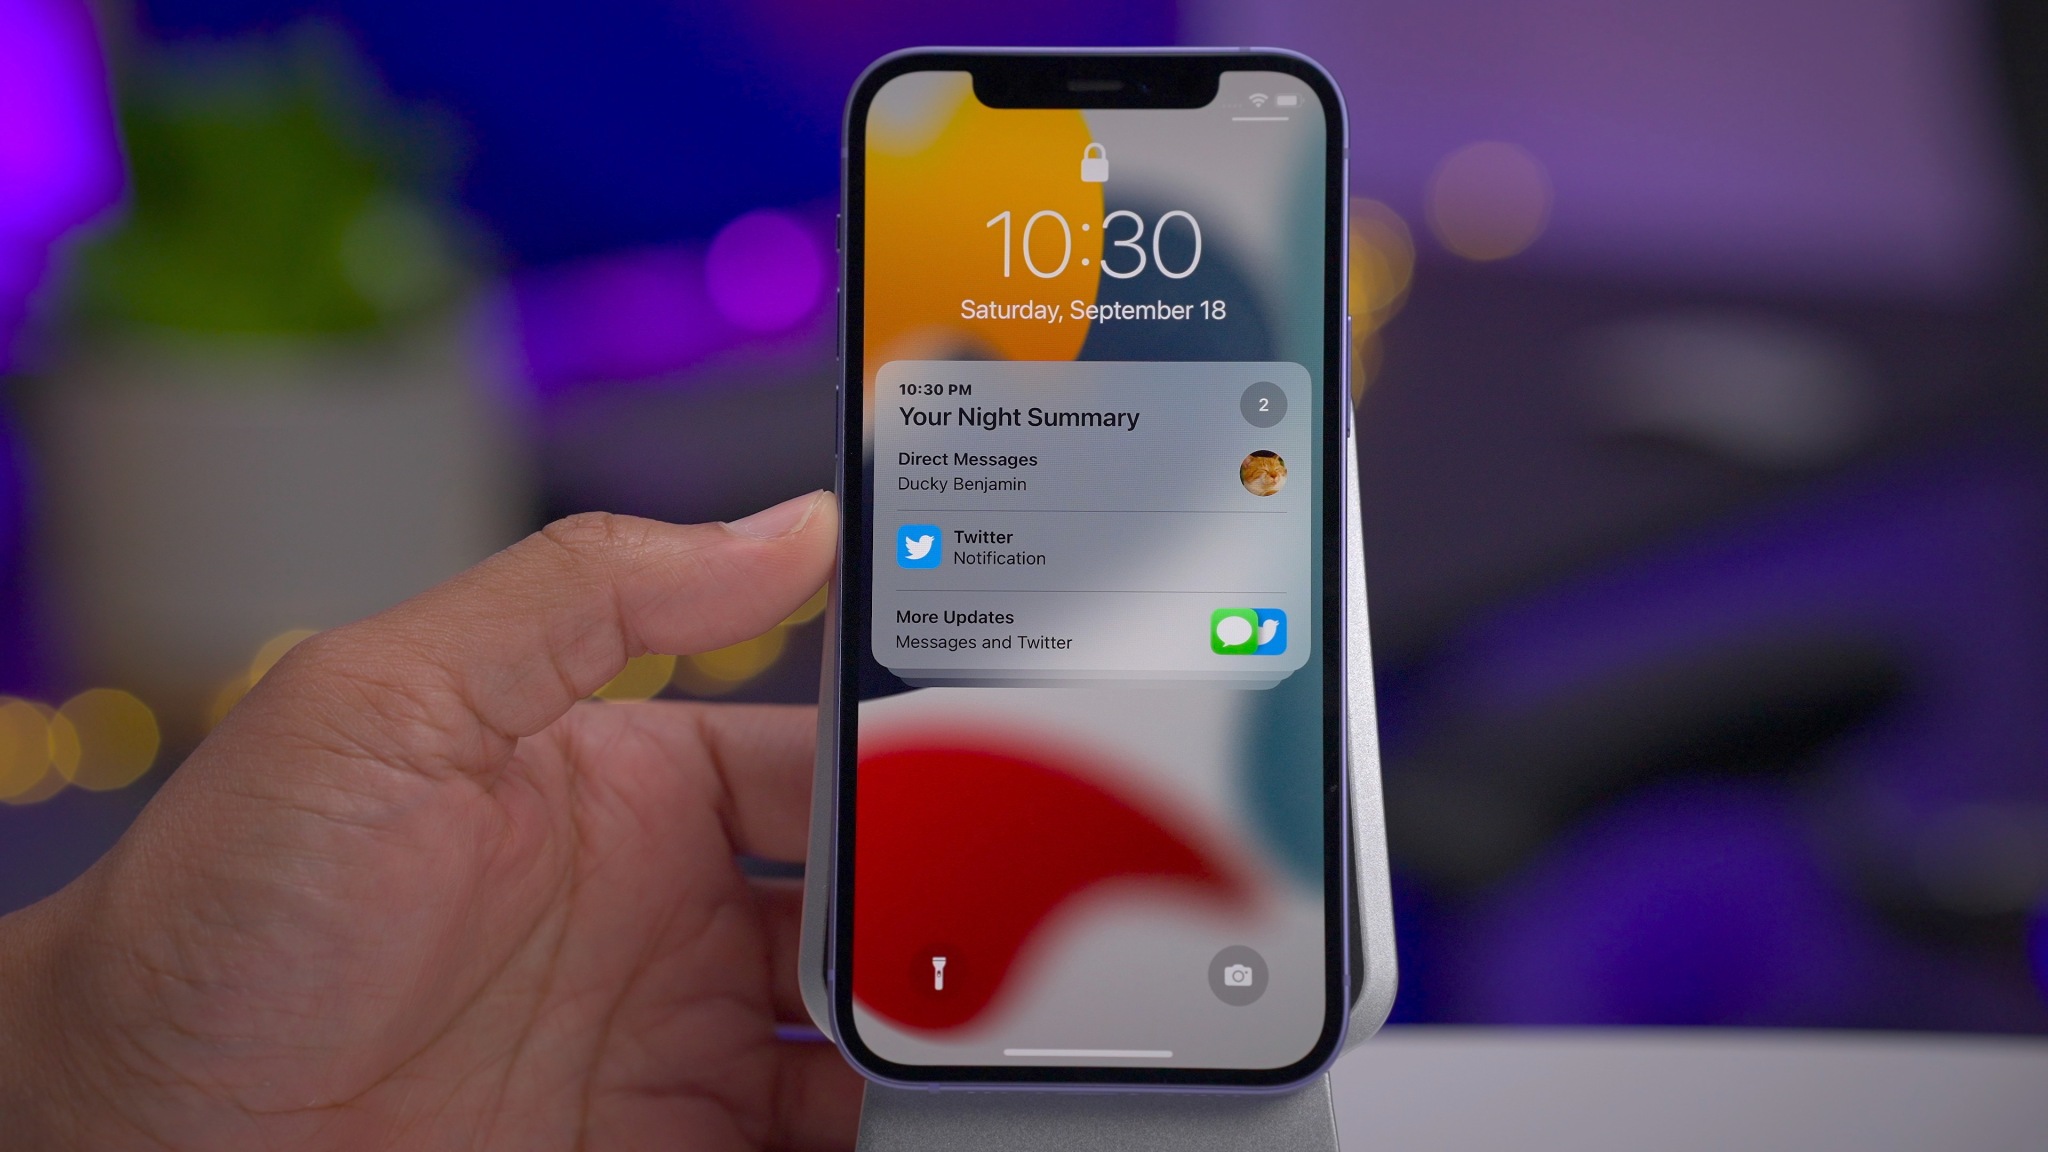 New features in iOS 15.2 beta include a redesigned Notification Summary